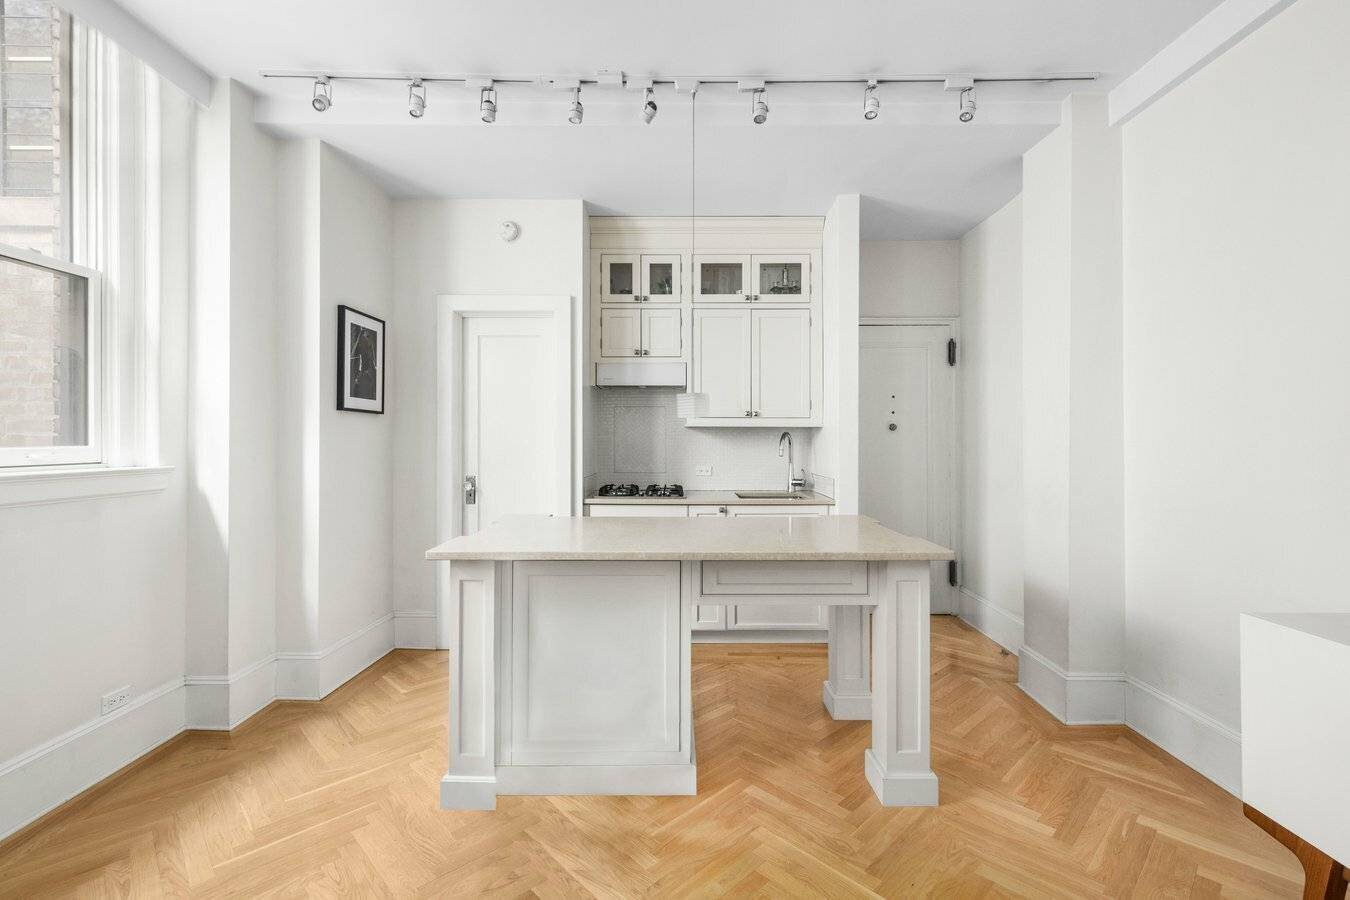 Experience the pinnacle of Upper East Side living, accompanied by one of the LOWEST MAINTENANCE FEES amp ; ATTRACTIVE PRICING !